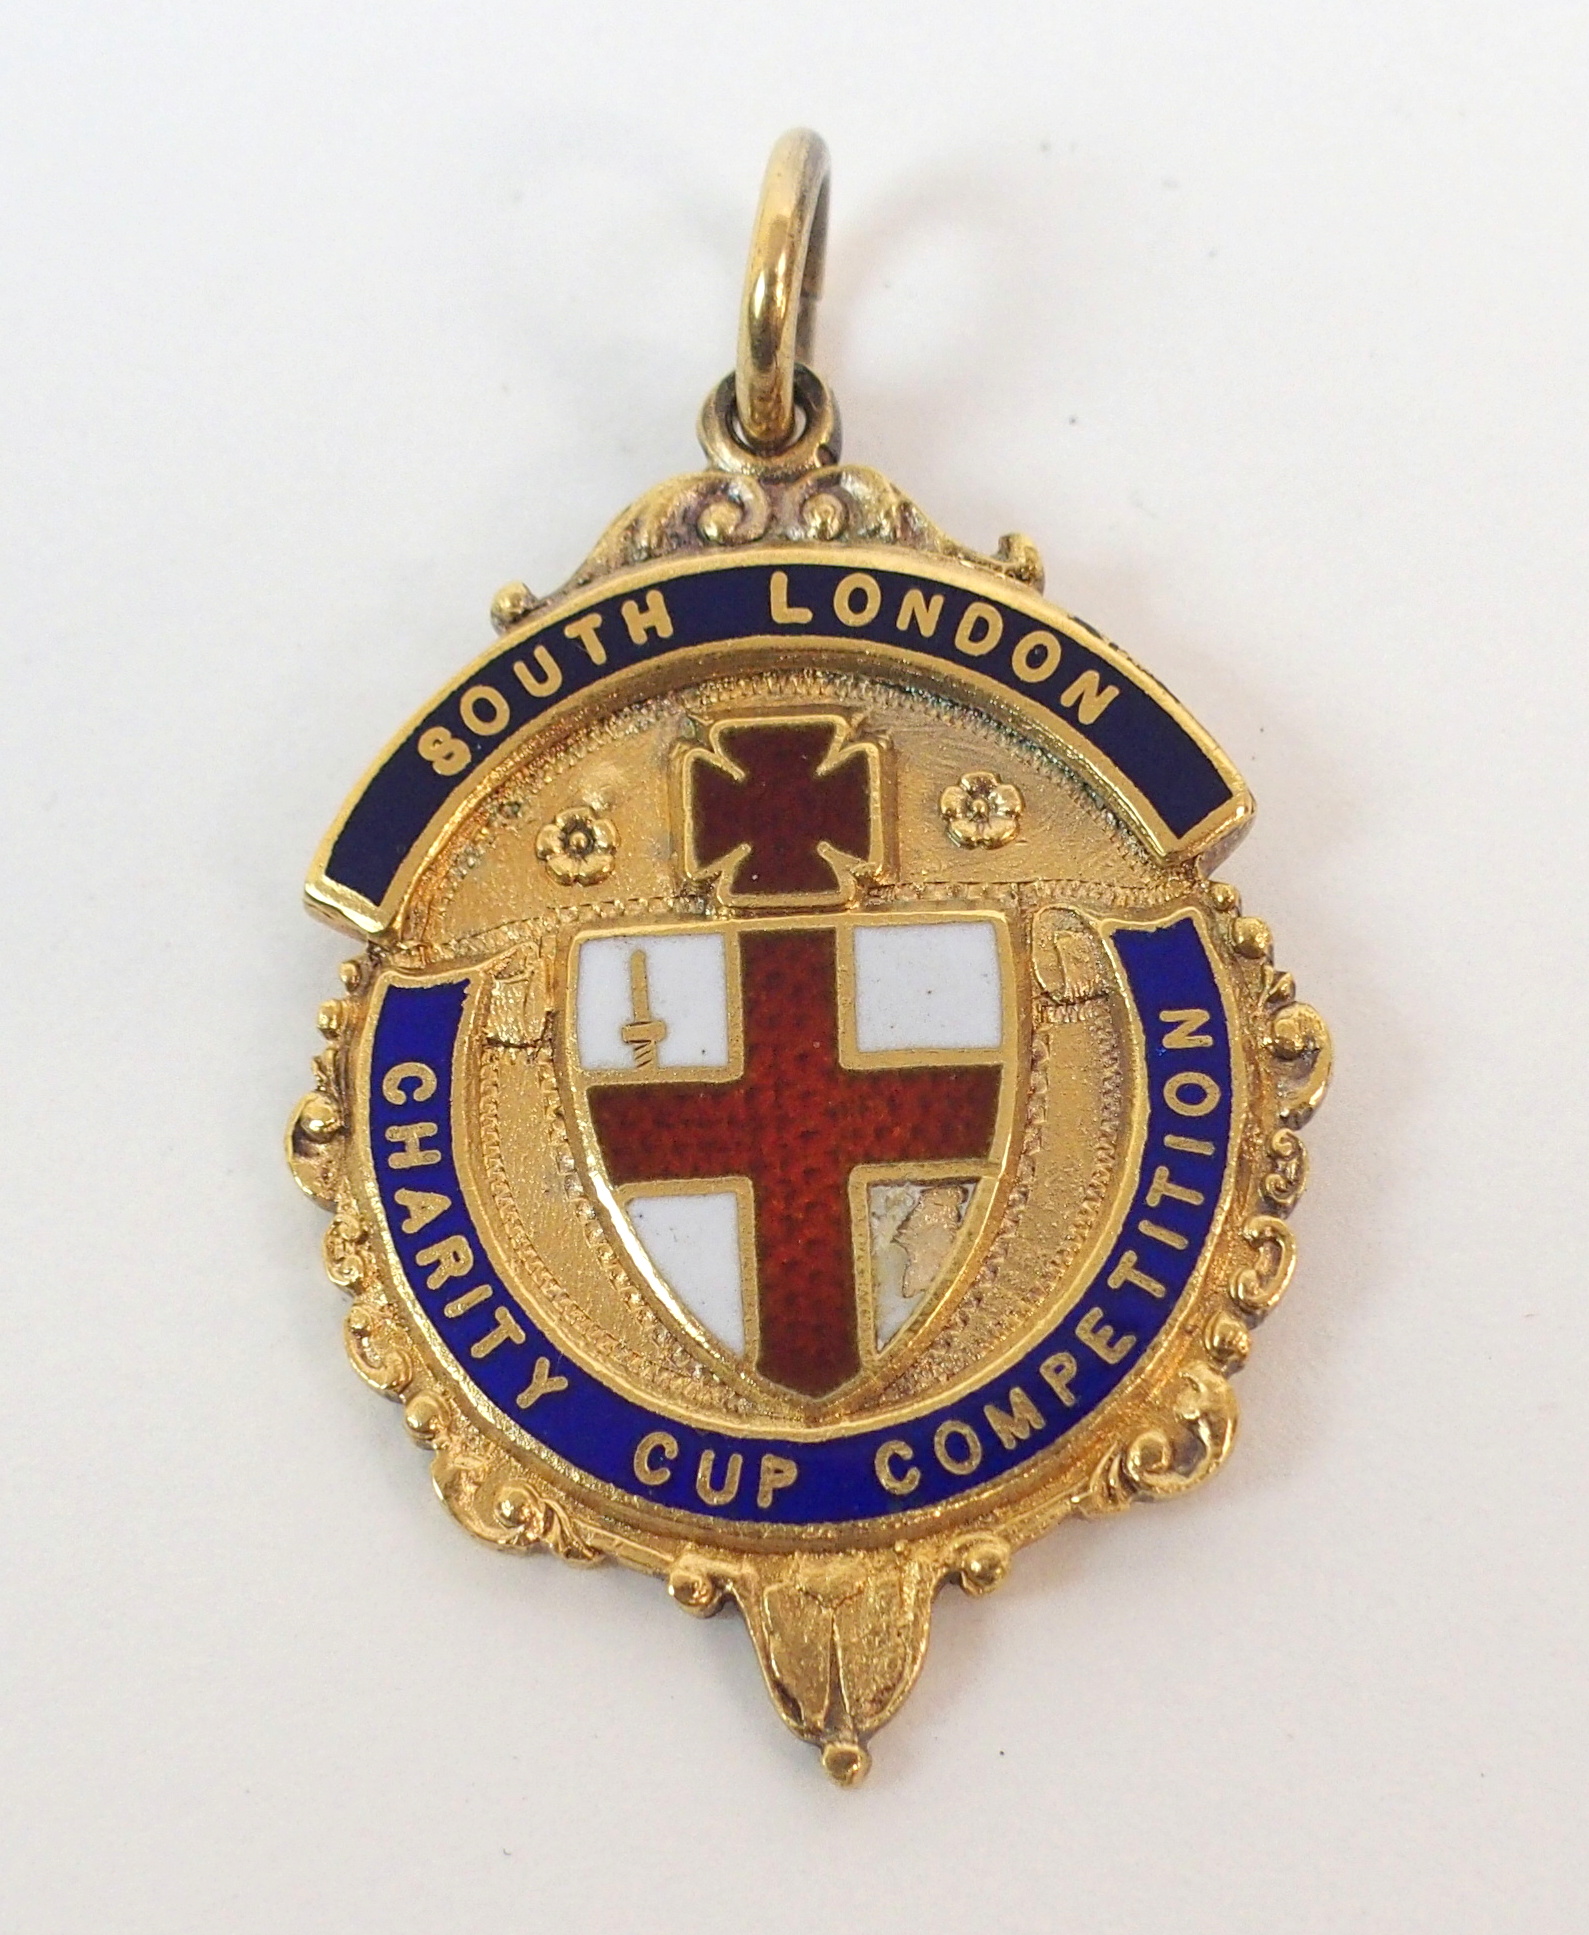 A SILVER-GILT AND ENAMEL SOUTH LONDON FOOTBALL MEDAL the obverse inscribed South London, Charity Cup - Image 3 of 4